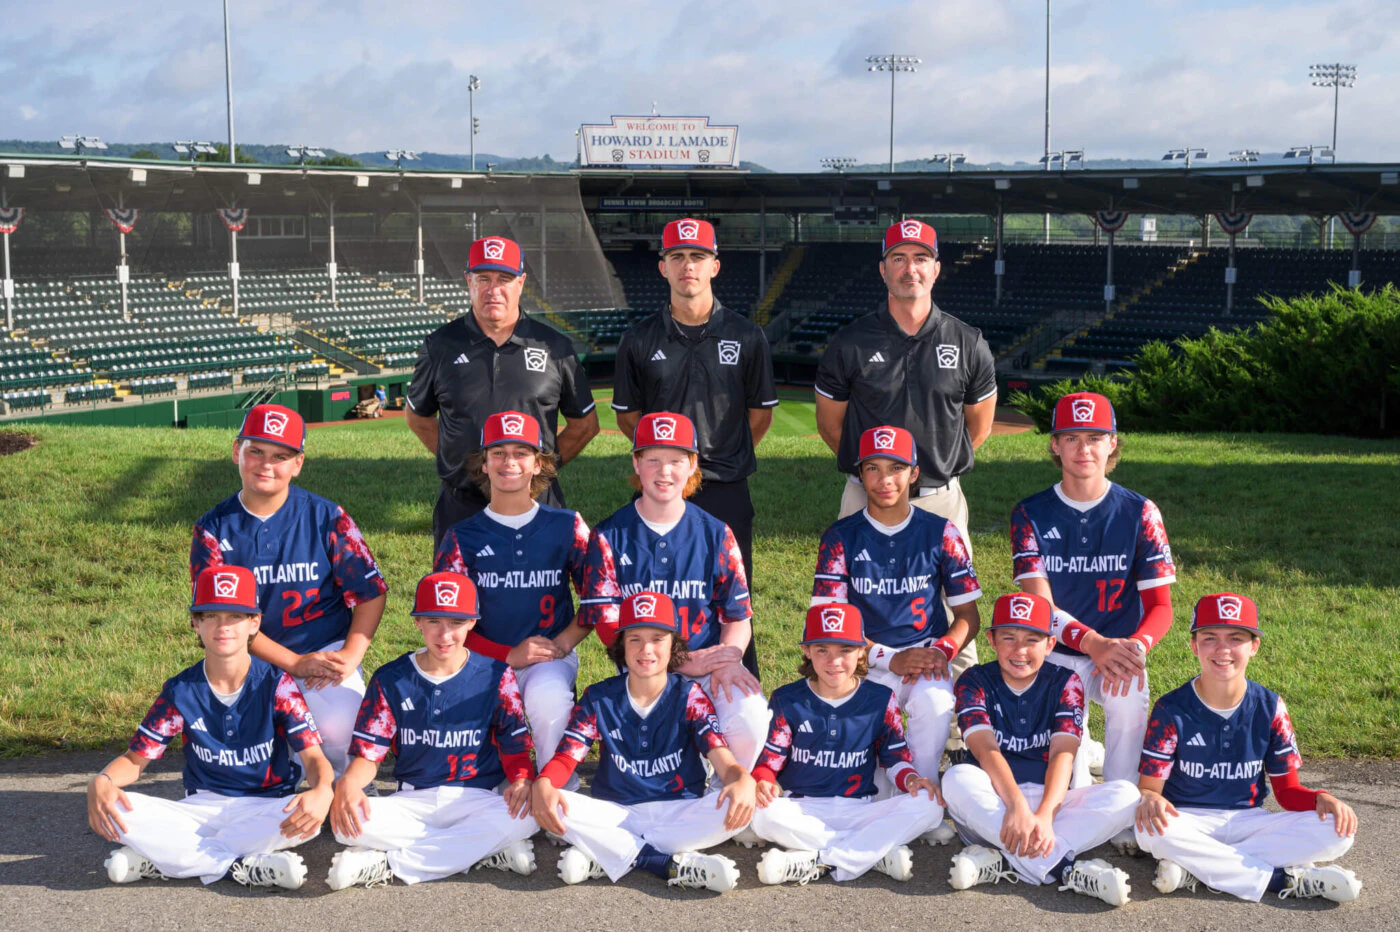 Pa. has first Little League World Series team since Red Land in